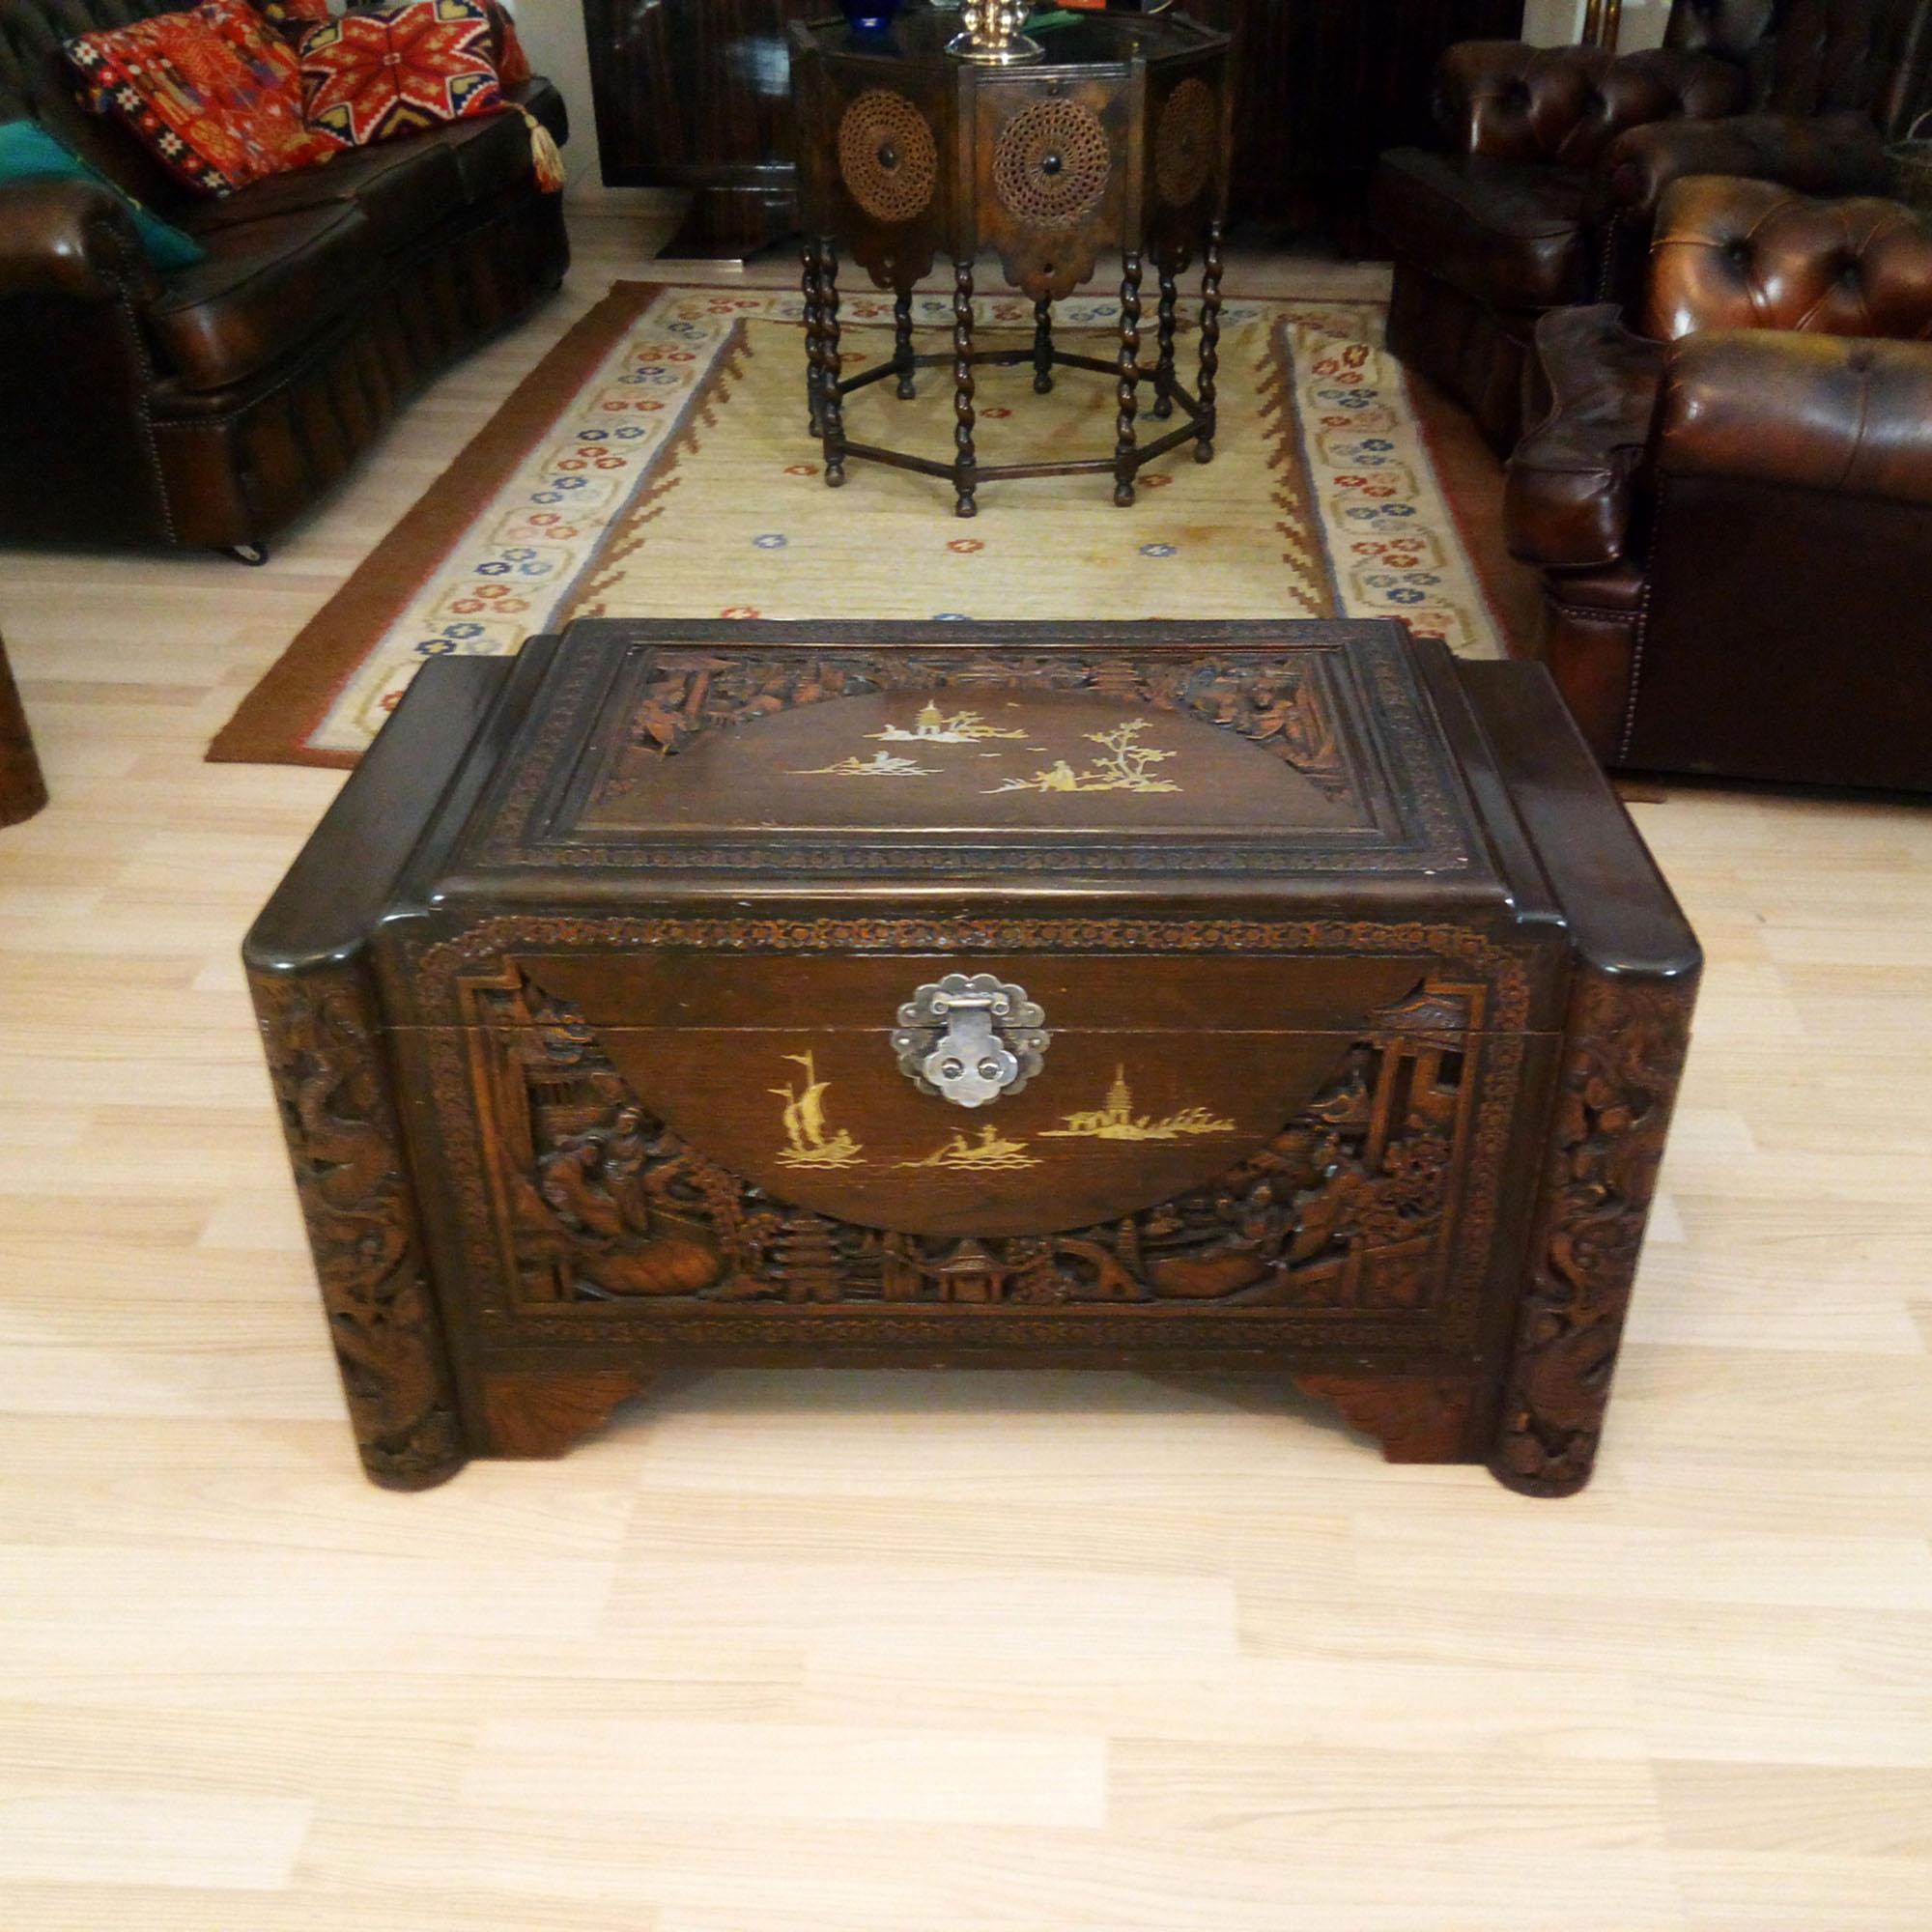 Mid-20th century oriental camphor wood chest or trunk. Elaborate shape with metal inlays and carved scenes. Retaining the original brass clasp and lock and sliding tray to the interior.
Vey good original condition.
Dimensions: 93 x 48 x 50 cm [37